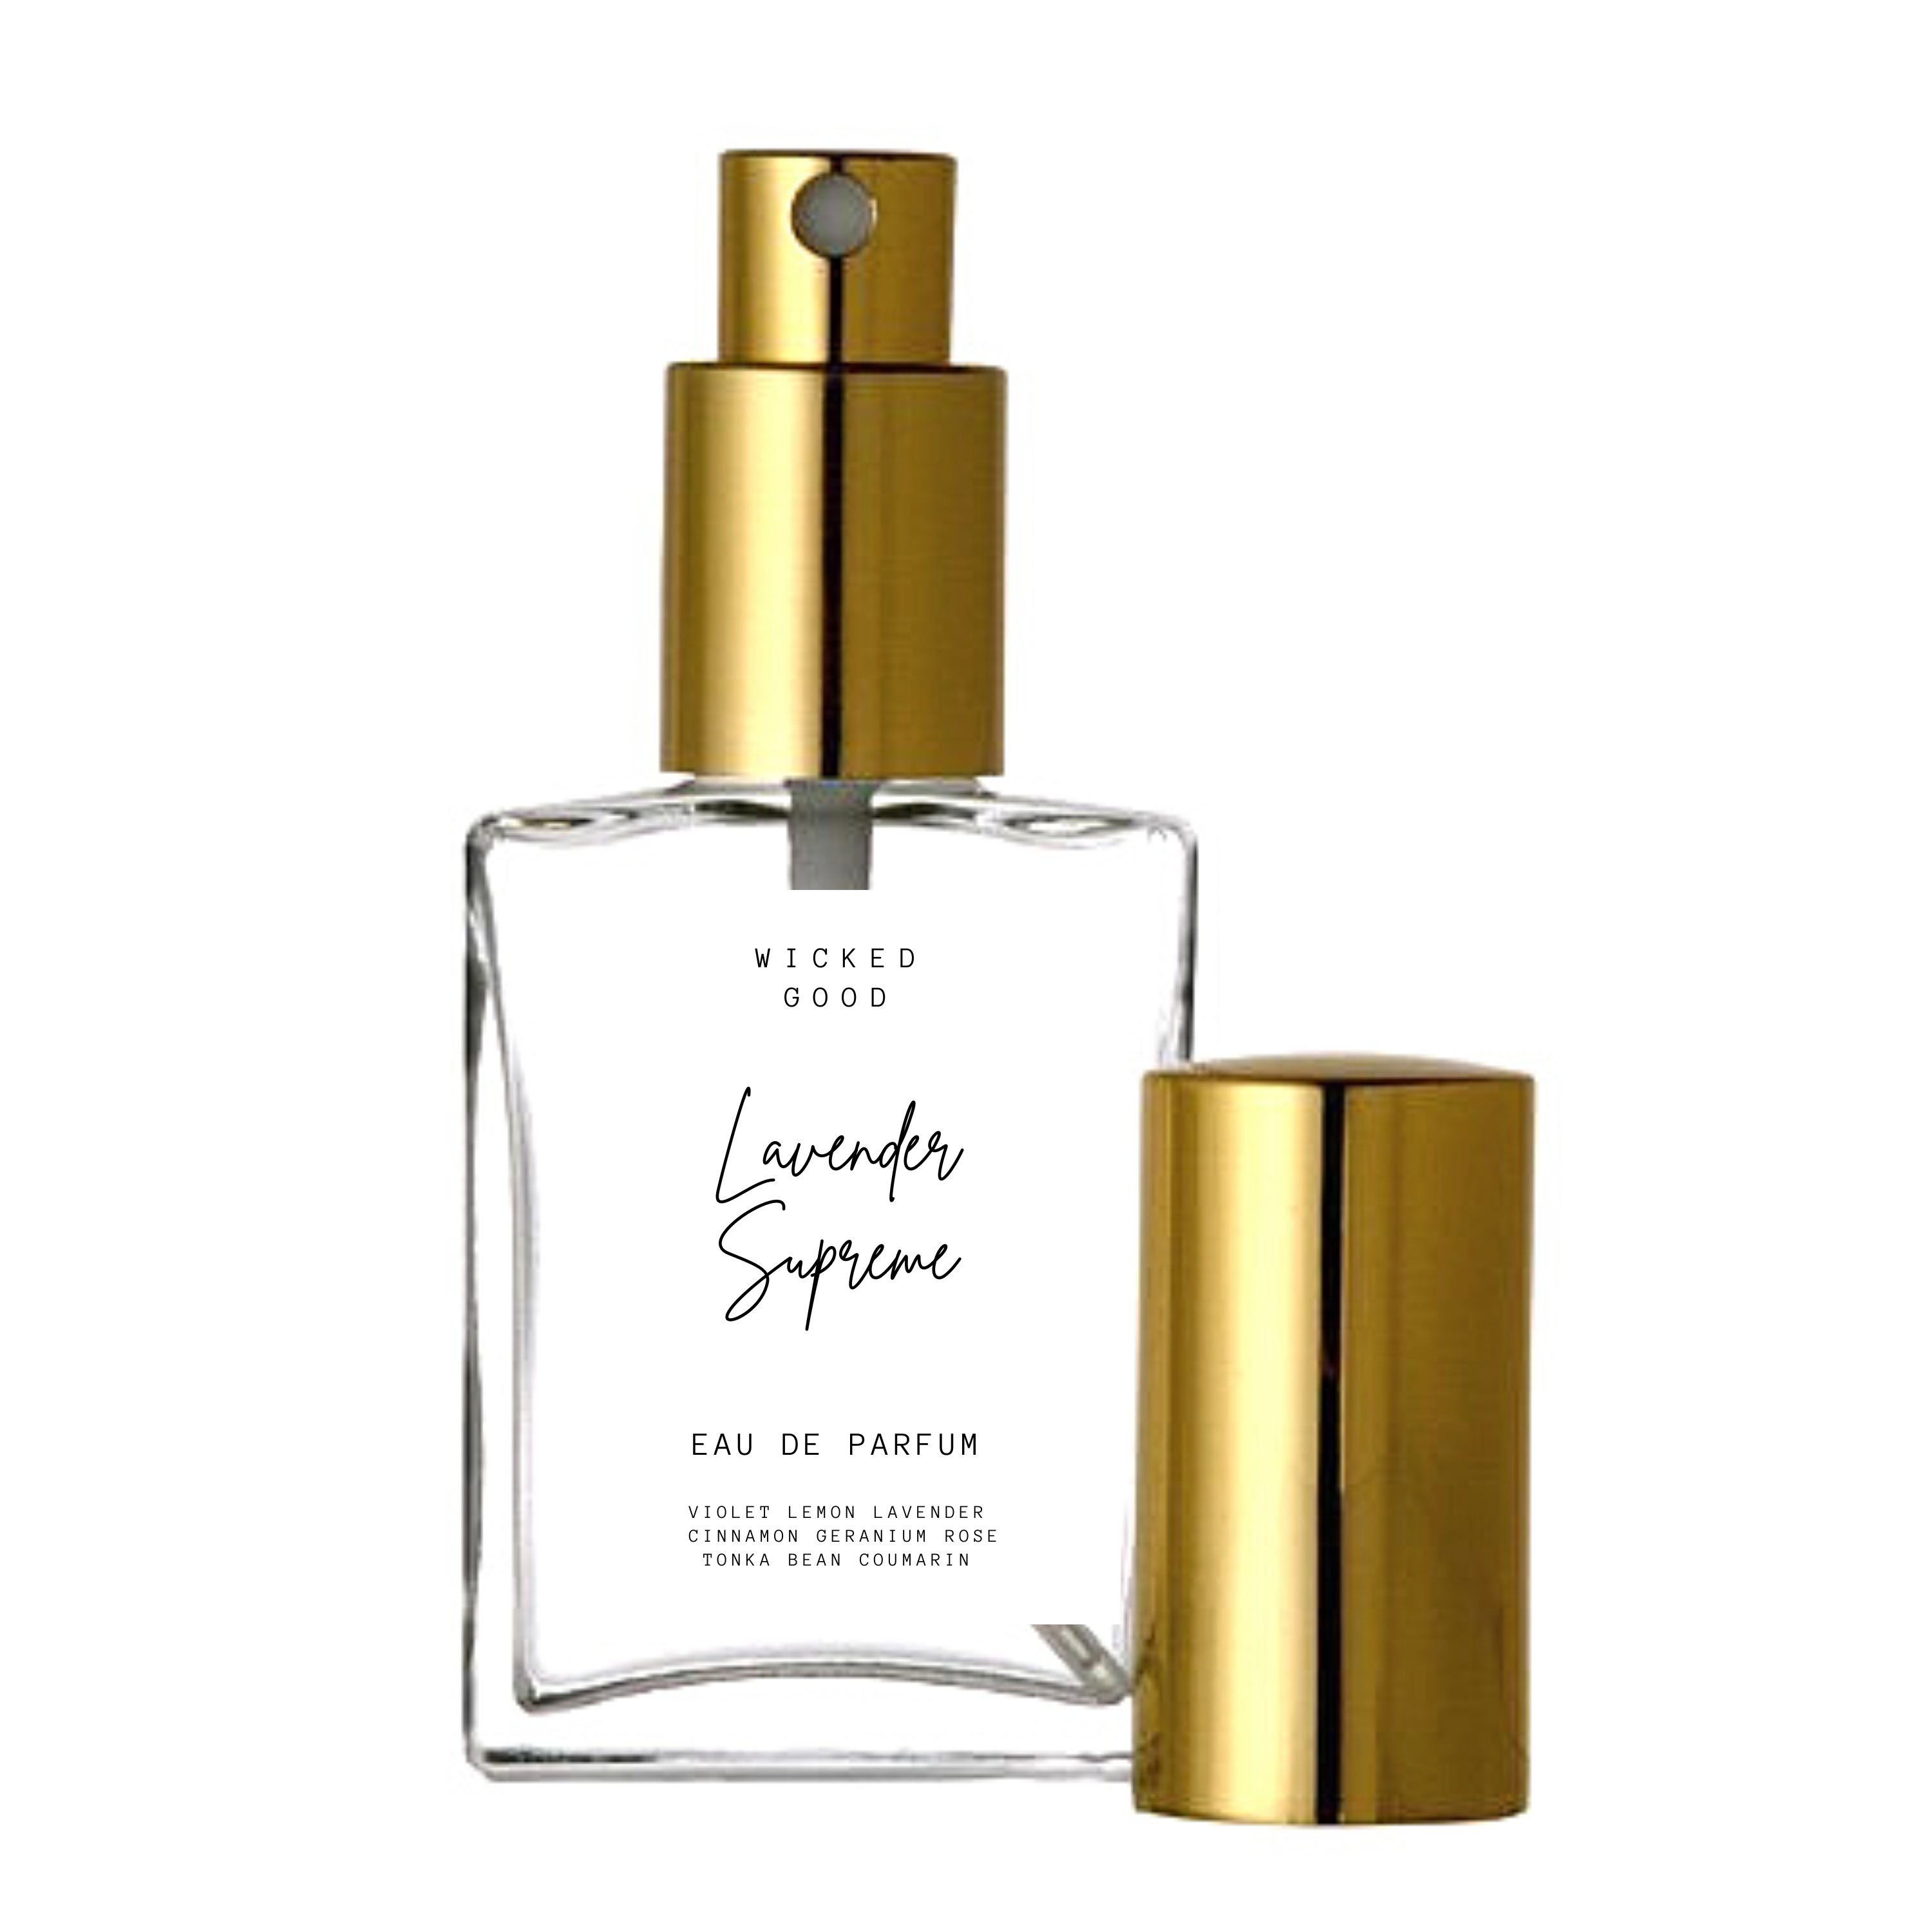 Compare Aroma to Lavender Extreme by Tom Ford Men Women Unisex 